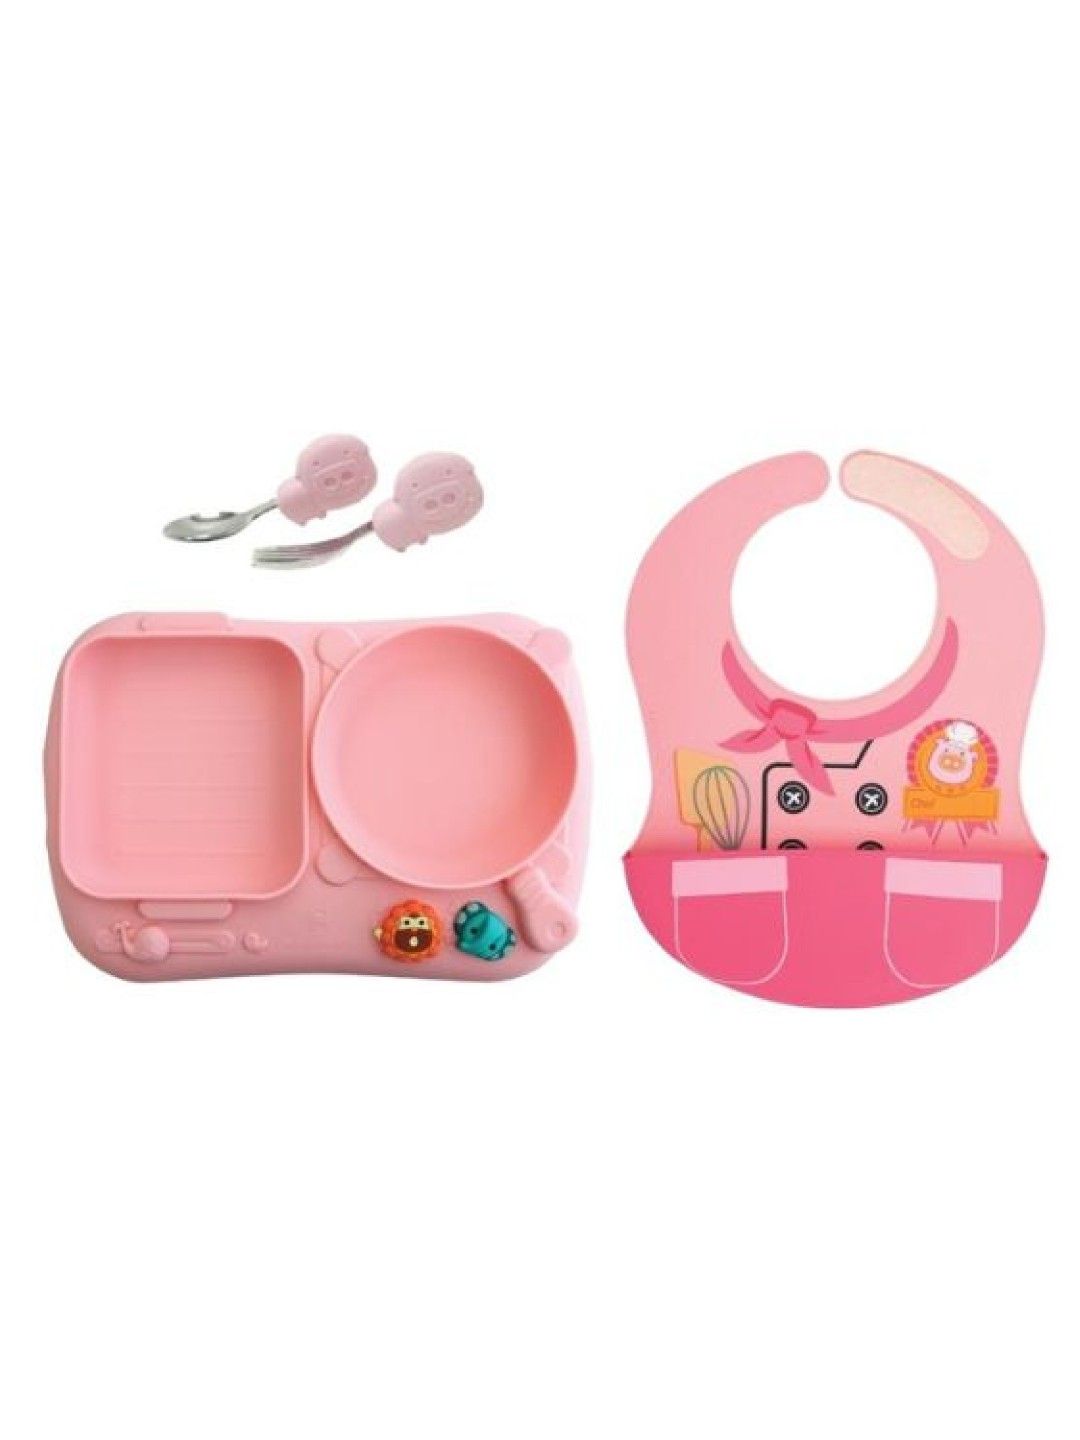 Marcus & Marcus Creativeplate Toddler Meal Time Set Little Chef (Pink- Image 1)